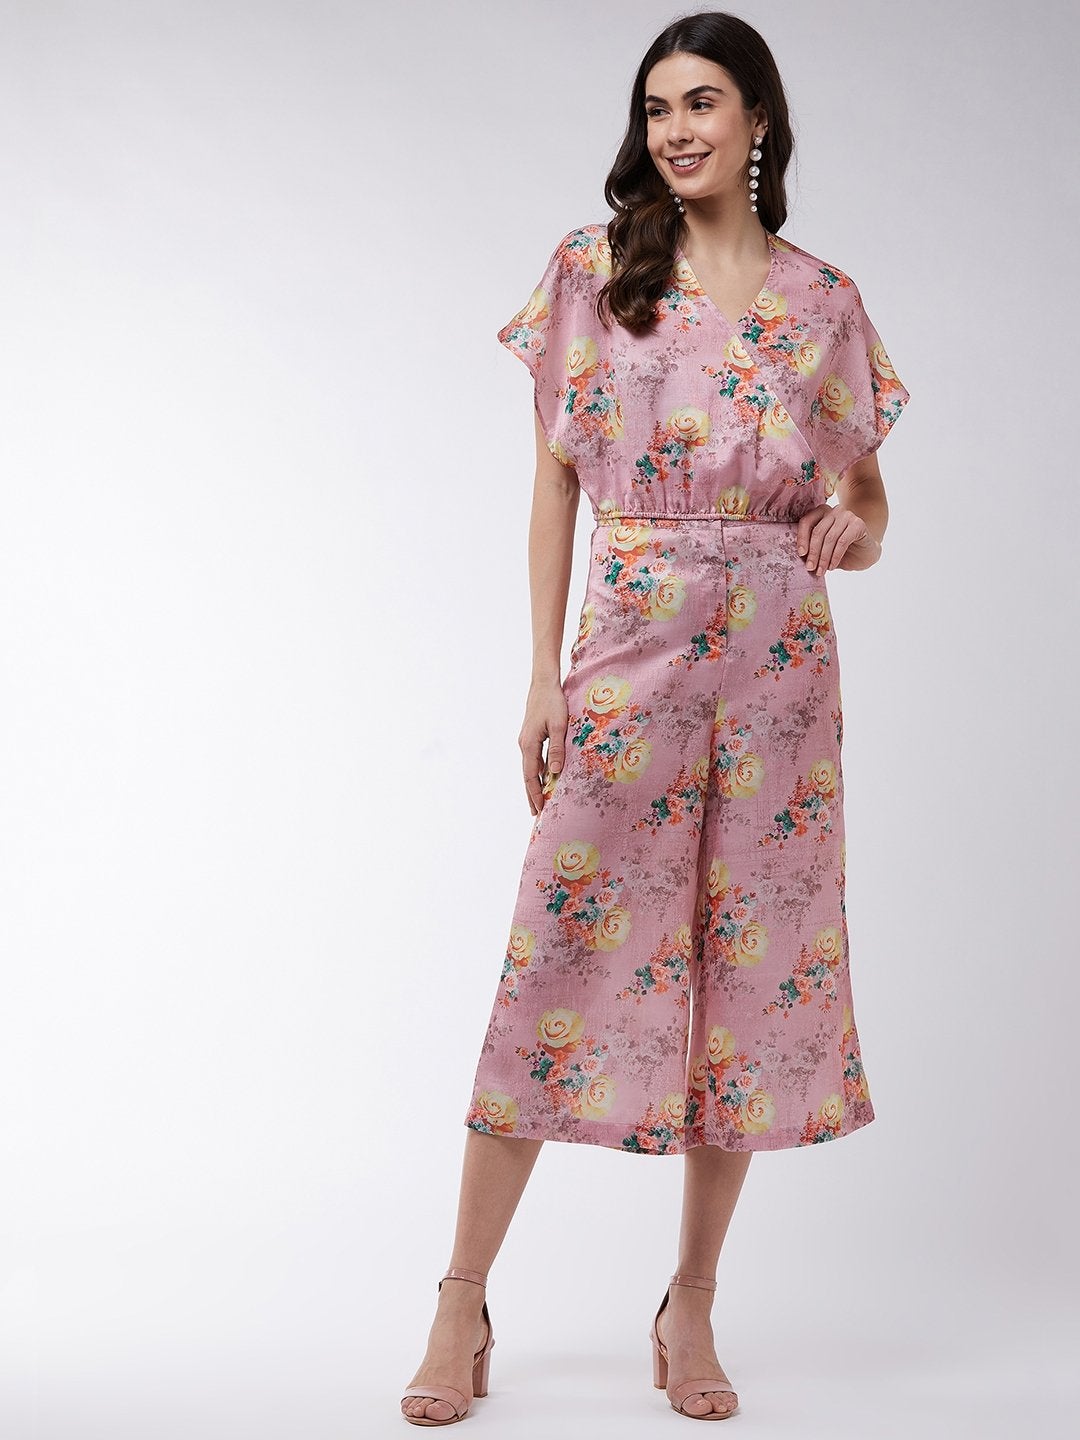 Women's Candy Inspired Floral Digital Printed Loose Top With High Waist Pants - Pannkh